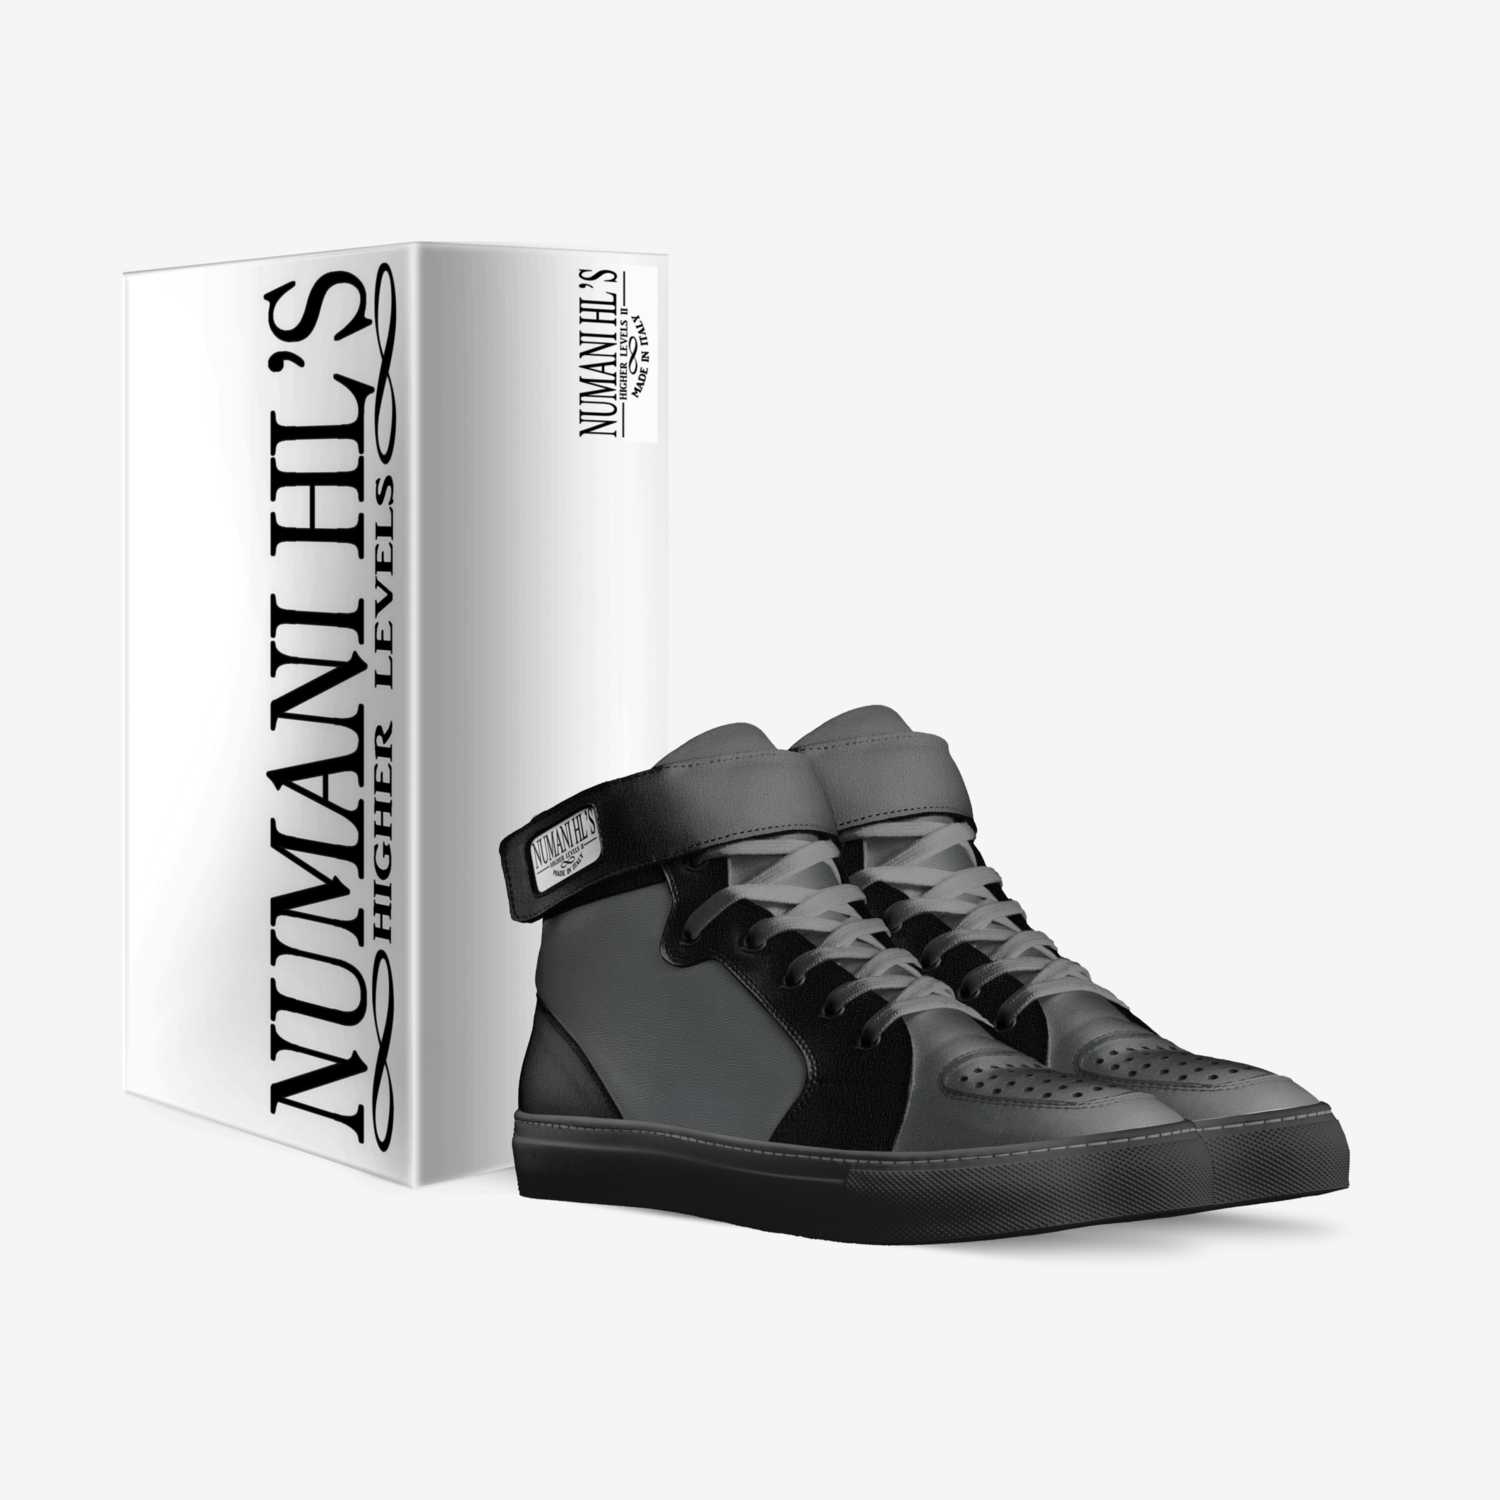 NUMANI "HIGHER LEVELS" custom made in Italy shoes by Numani Clothing & Co. | Box view